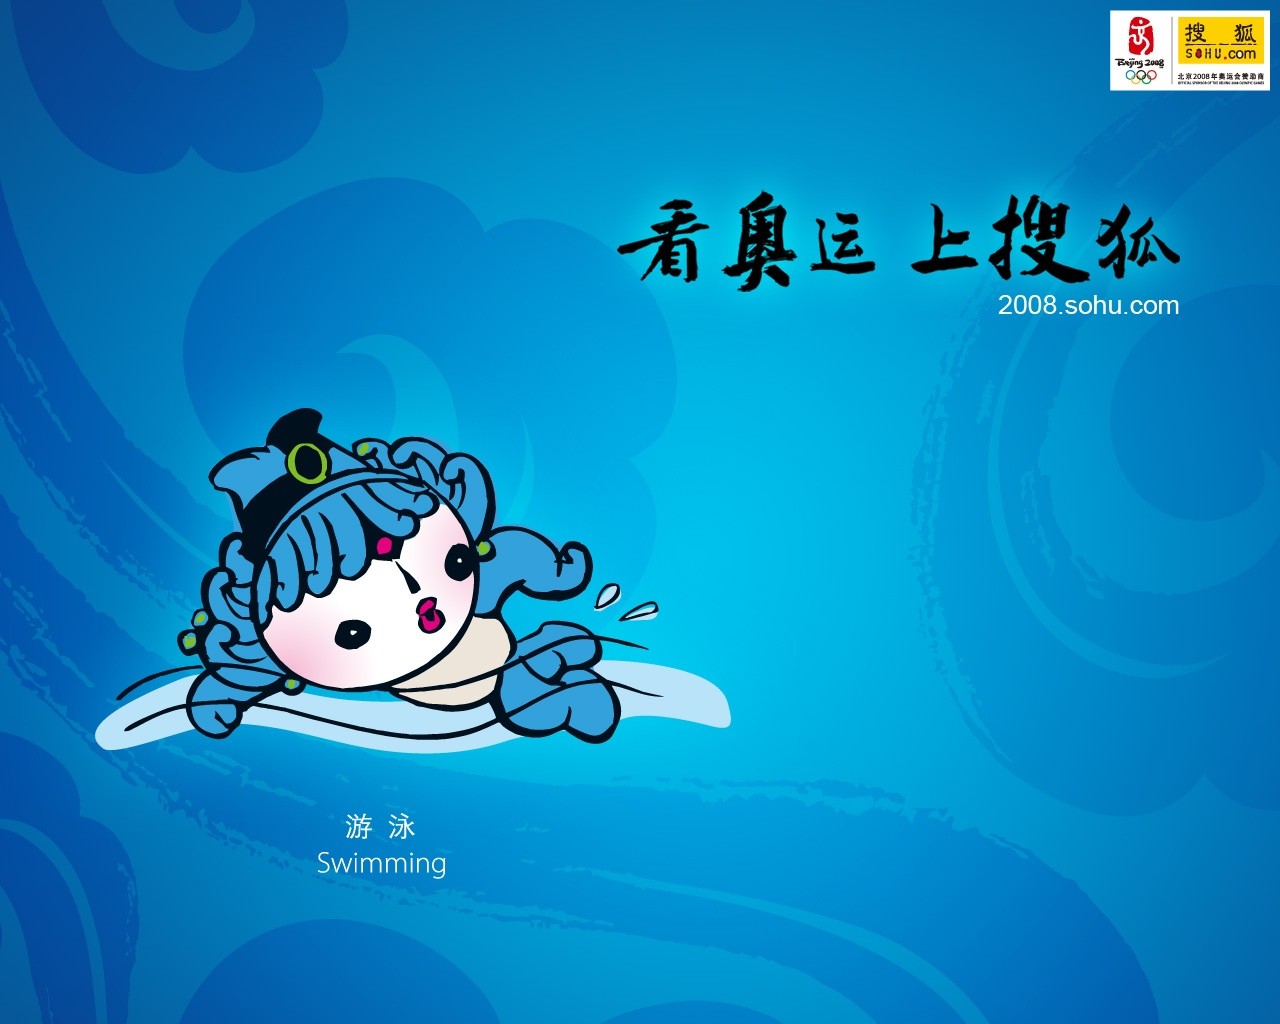 08 Olympic Games Fuwa Wallpapers #38 - 1280x1024